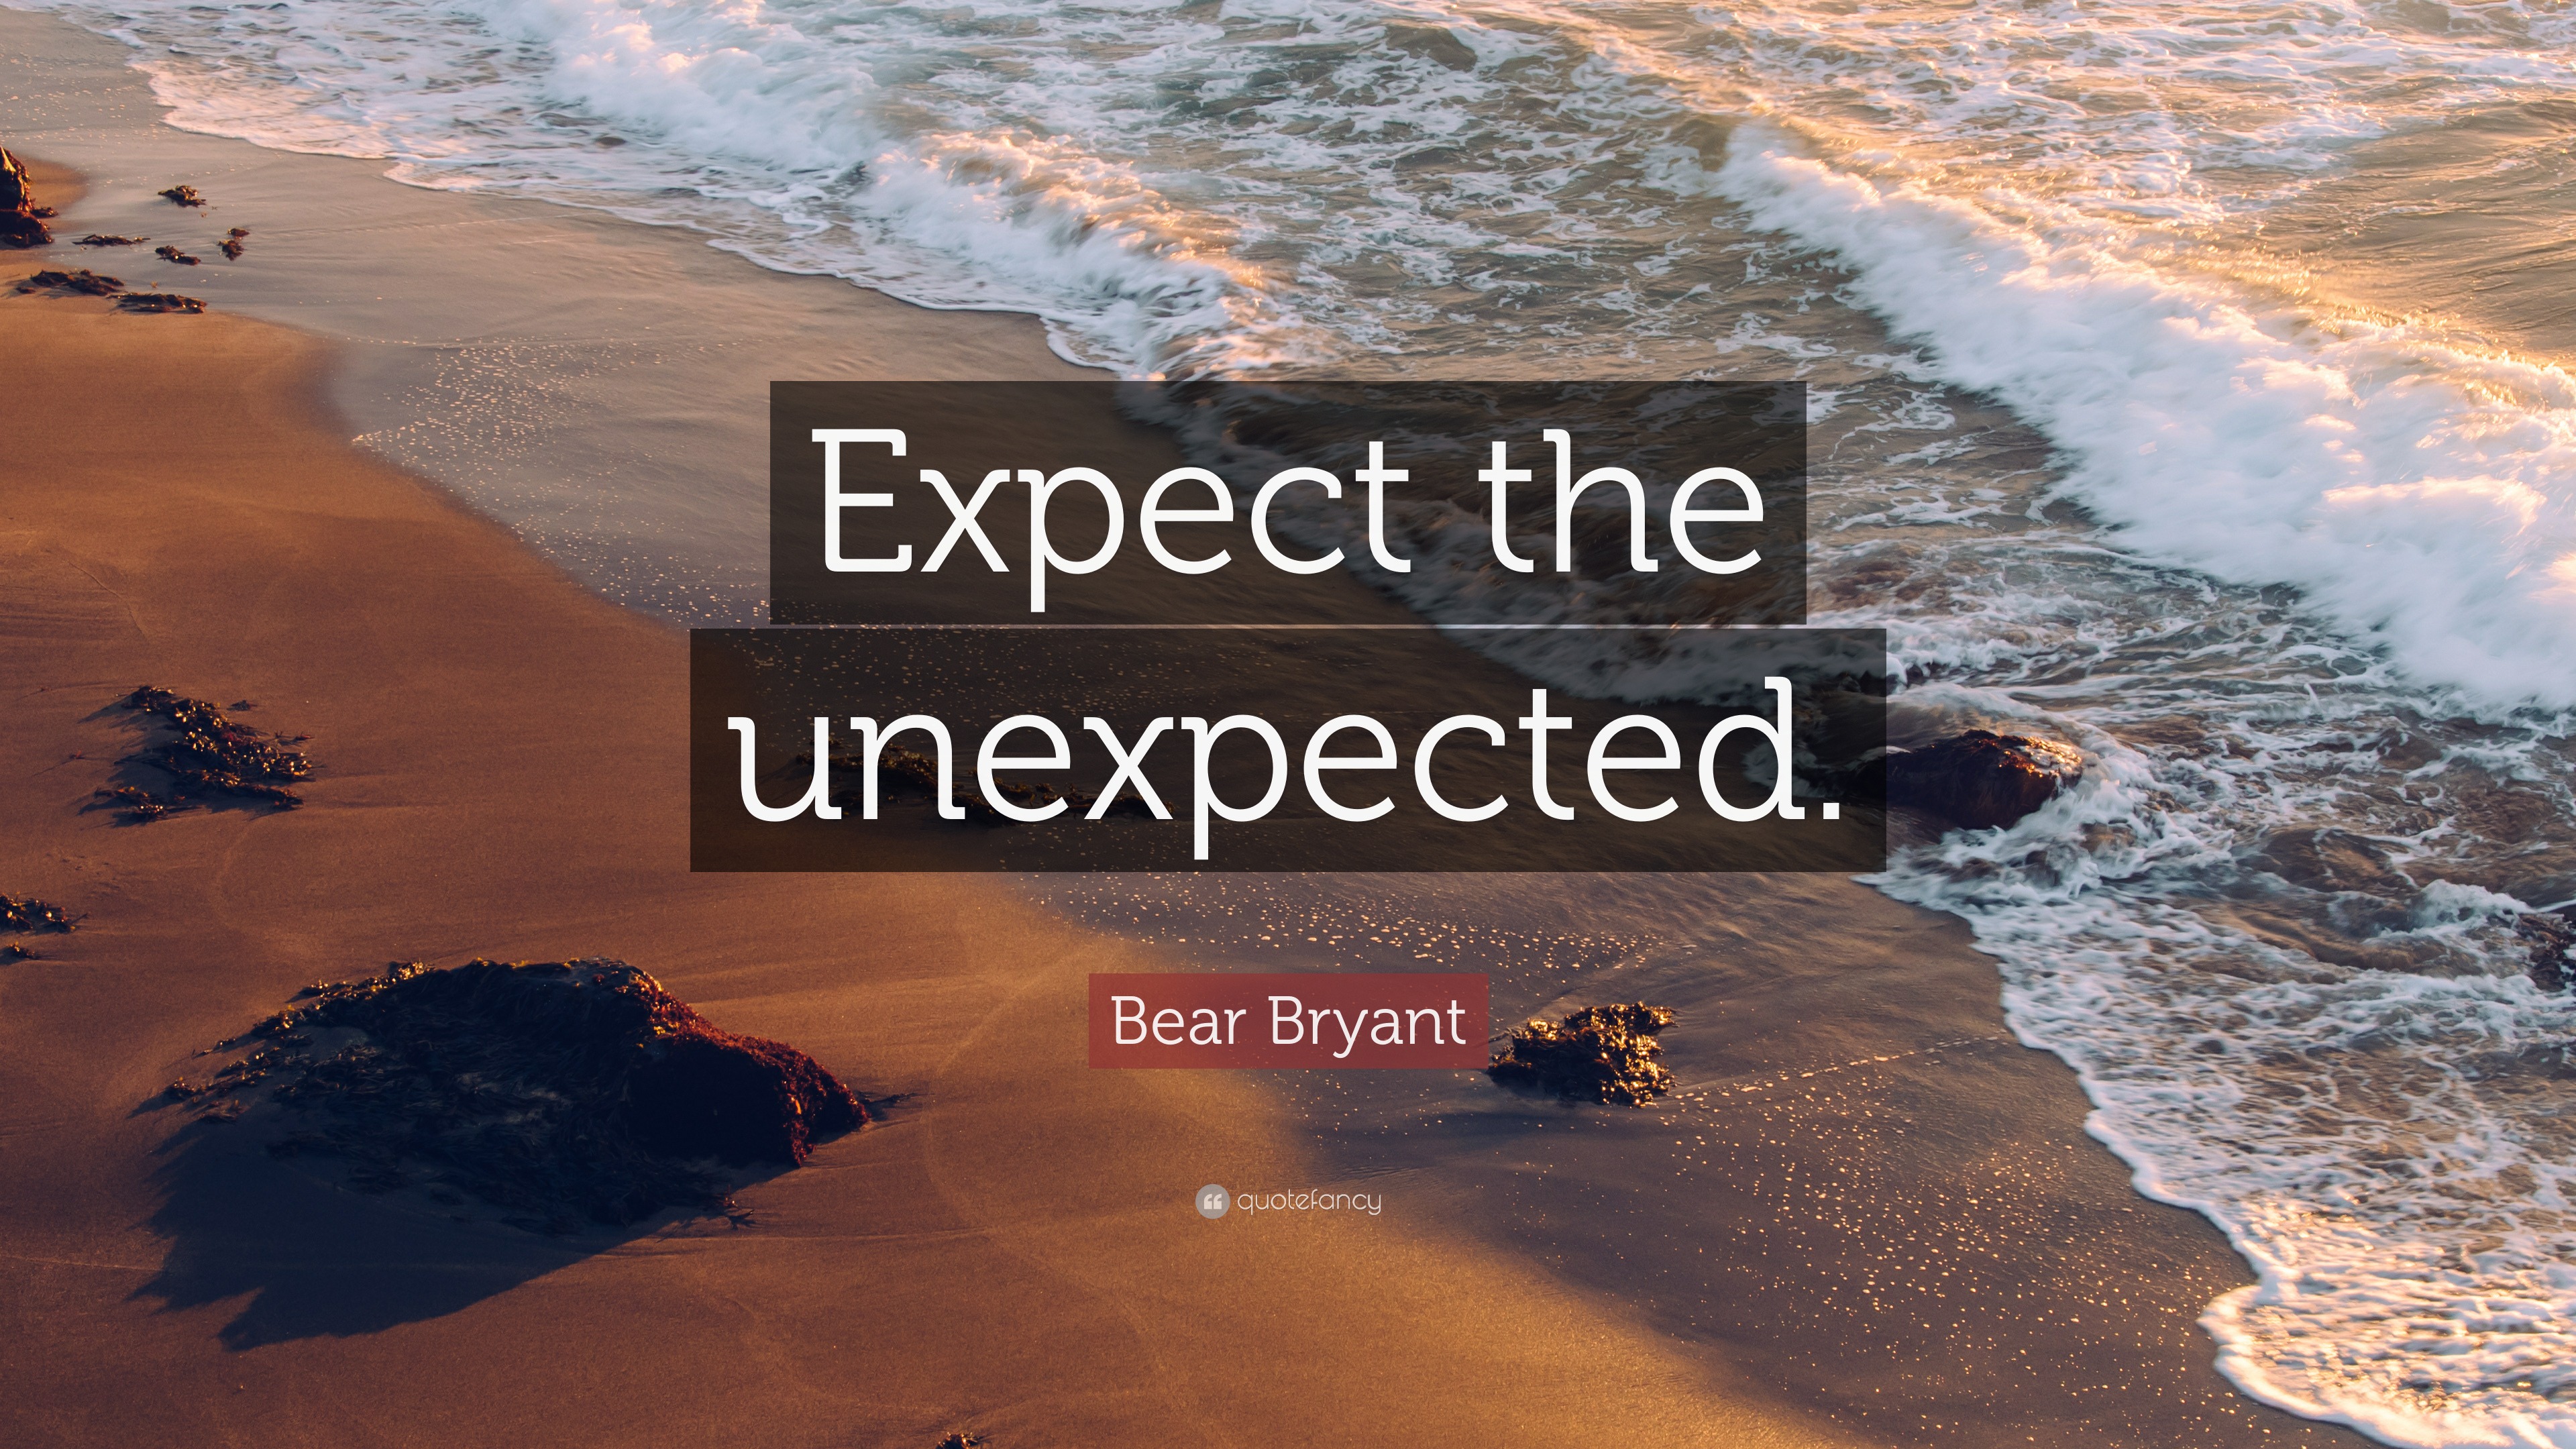 Bear Bryant Quote: “Expect the unexpected.”